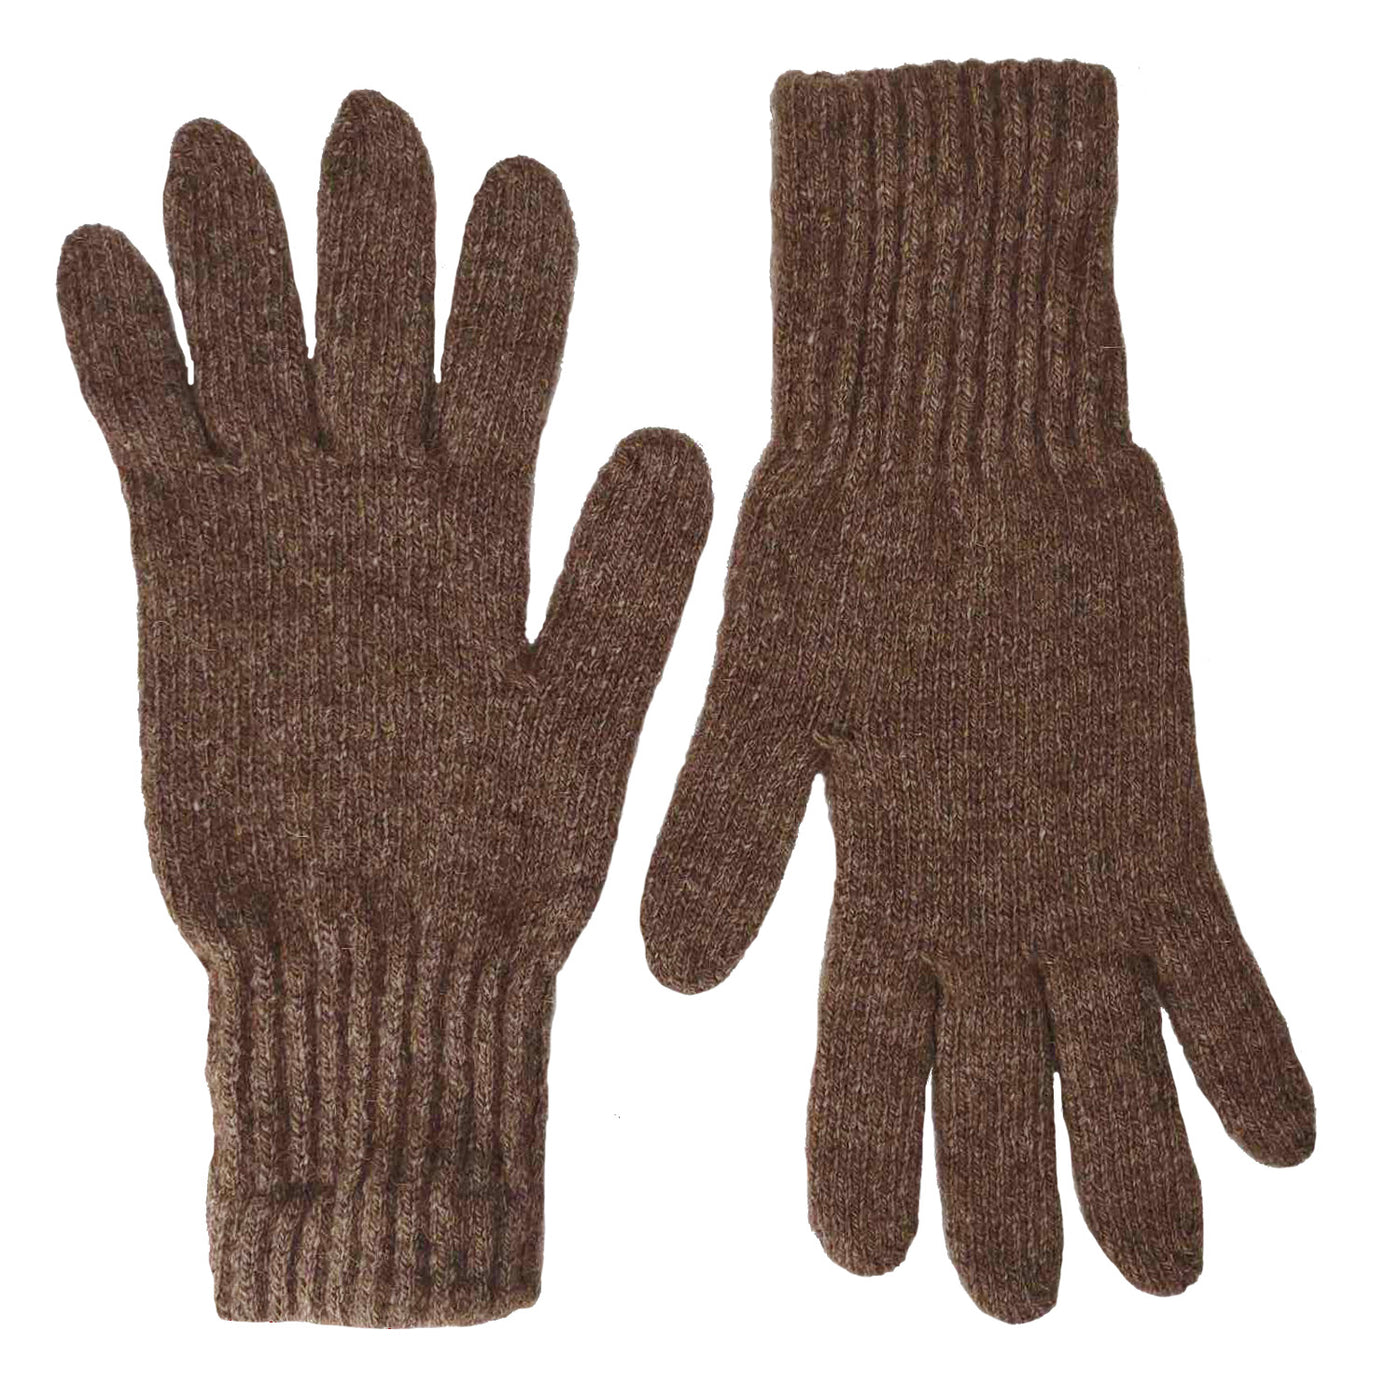 Bison and wool gloves